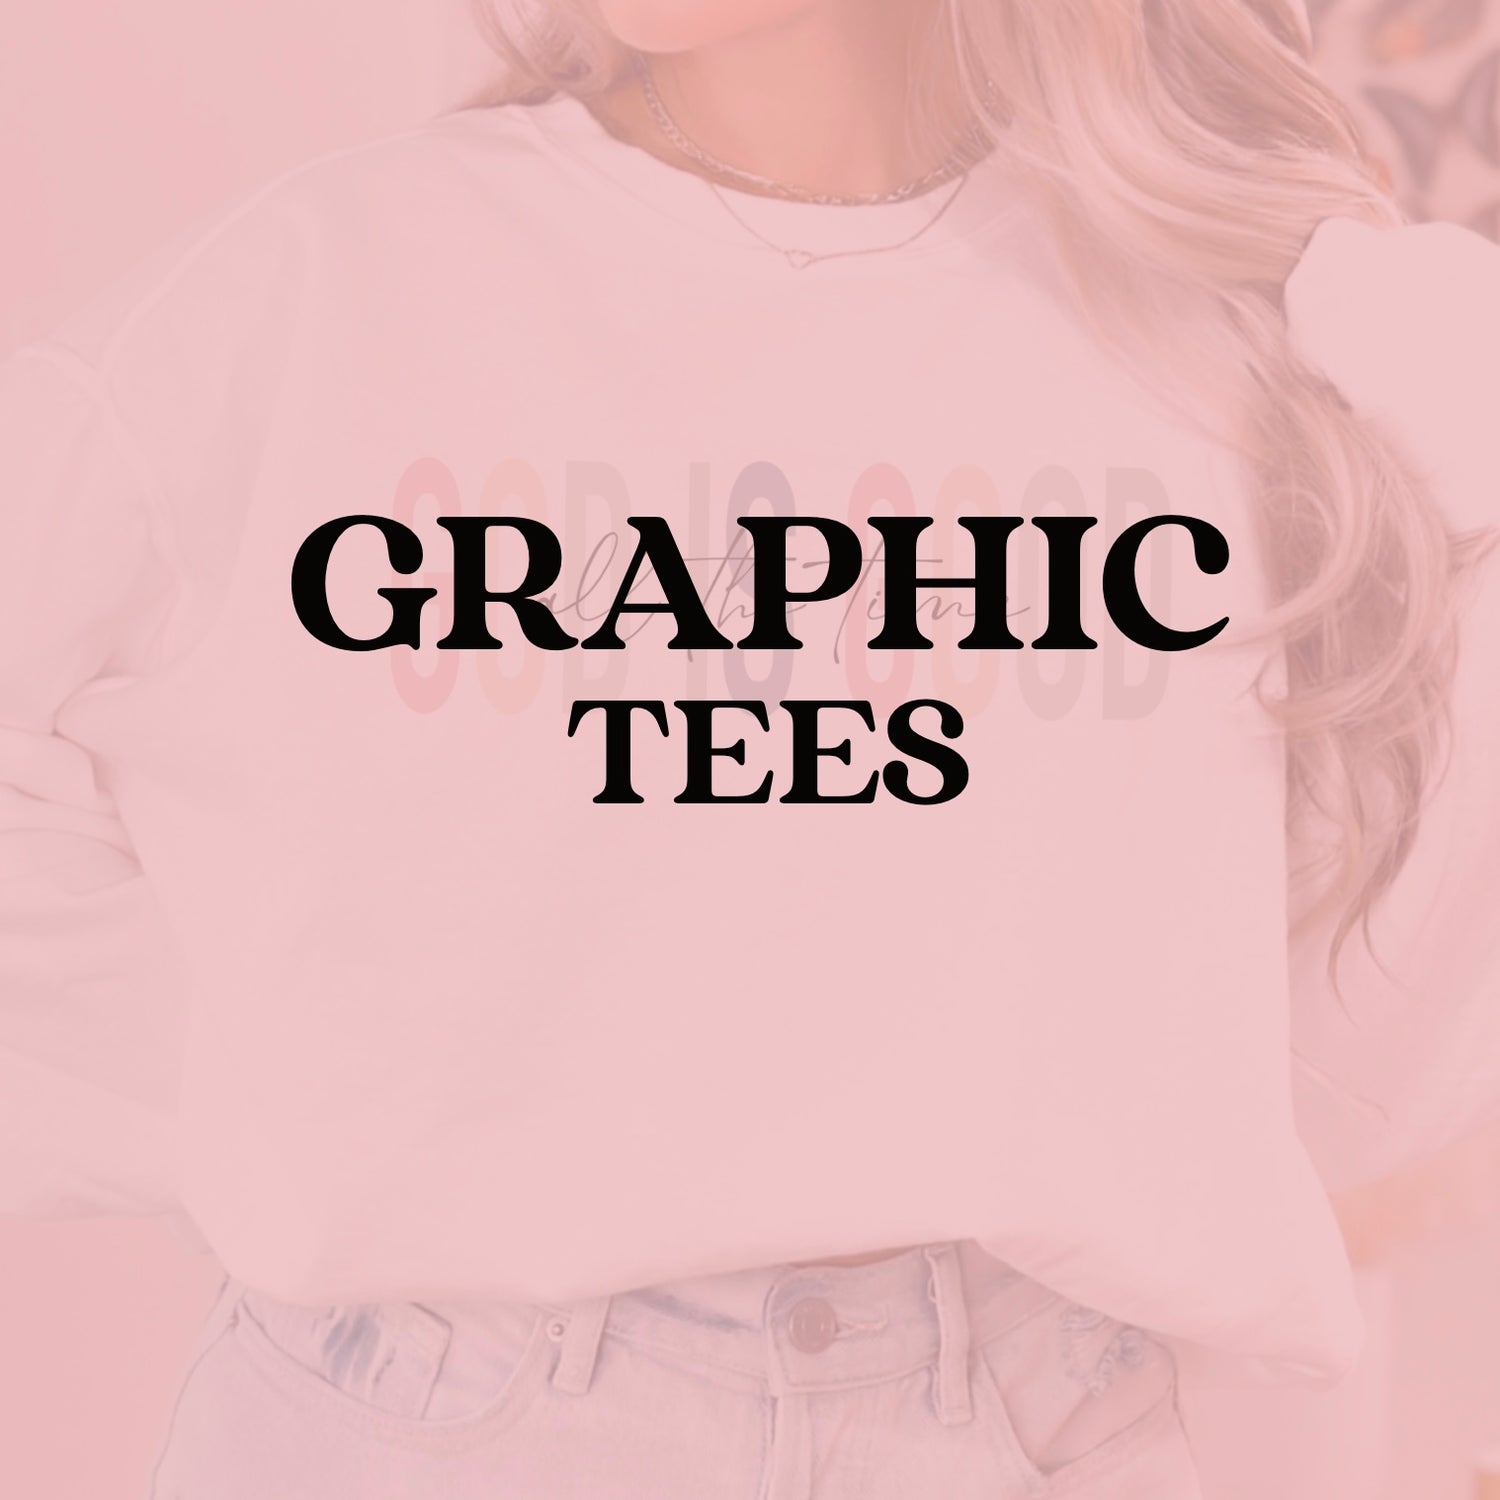 ALL GRAPHIC TEES - TAT 3-8 BUSINESS DAYS